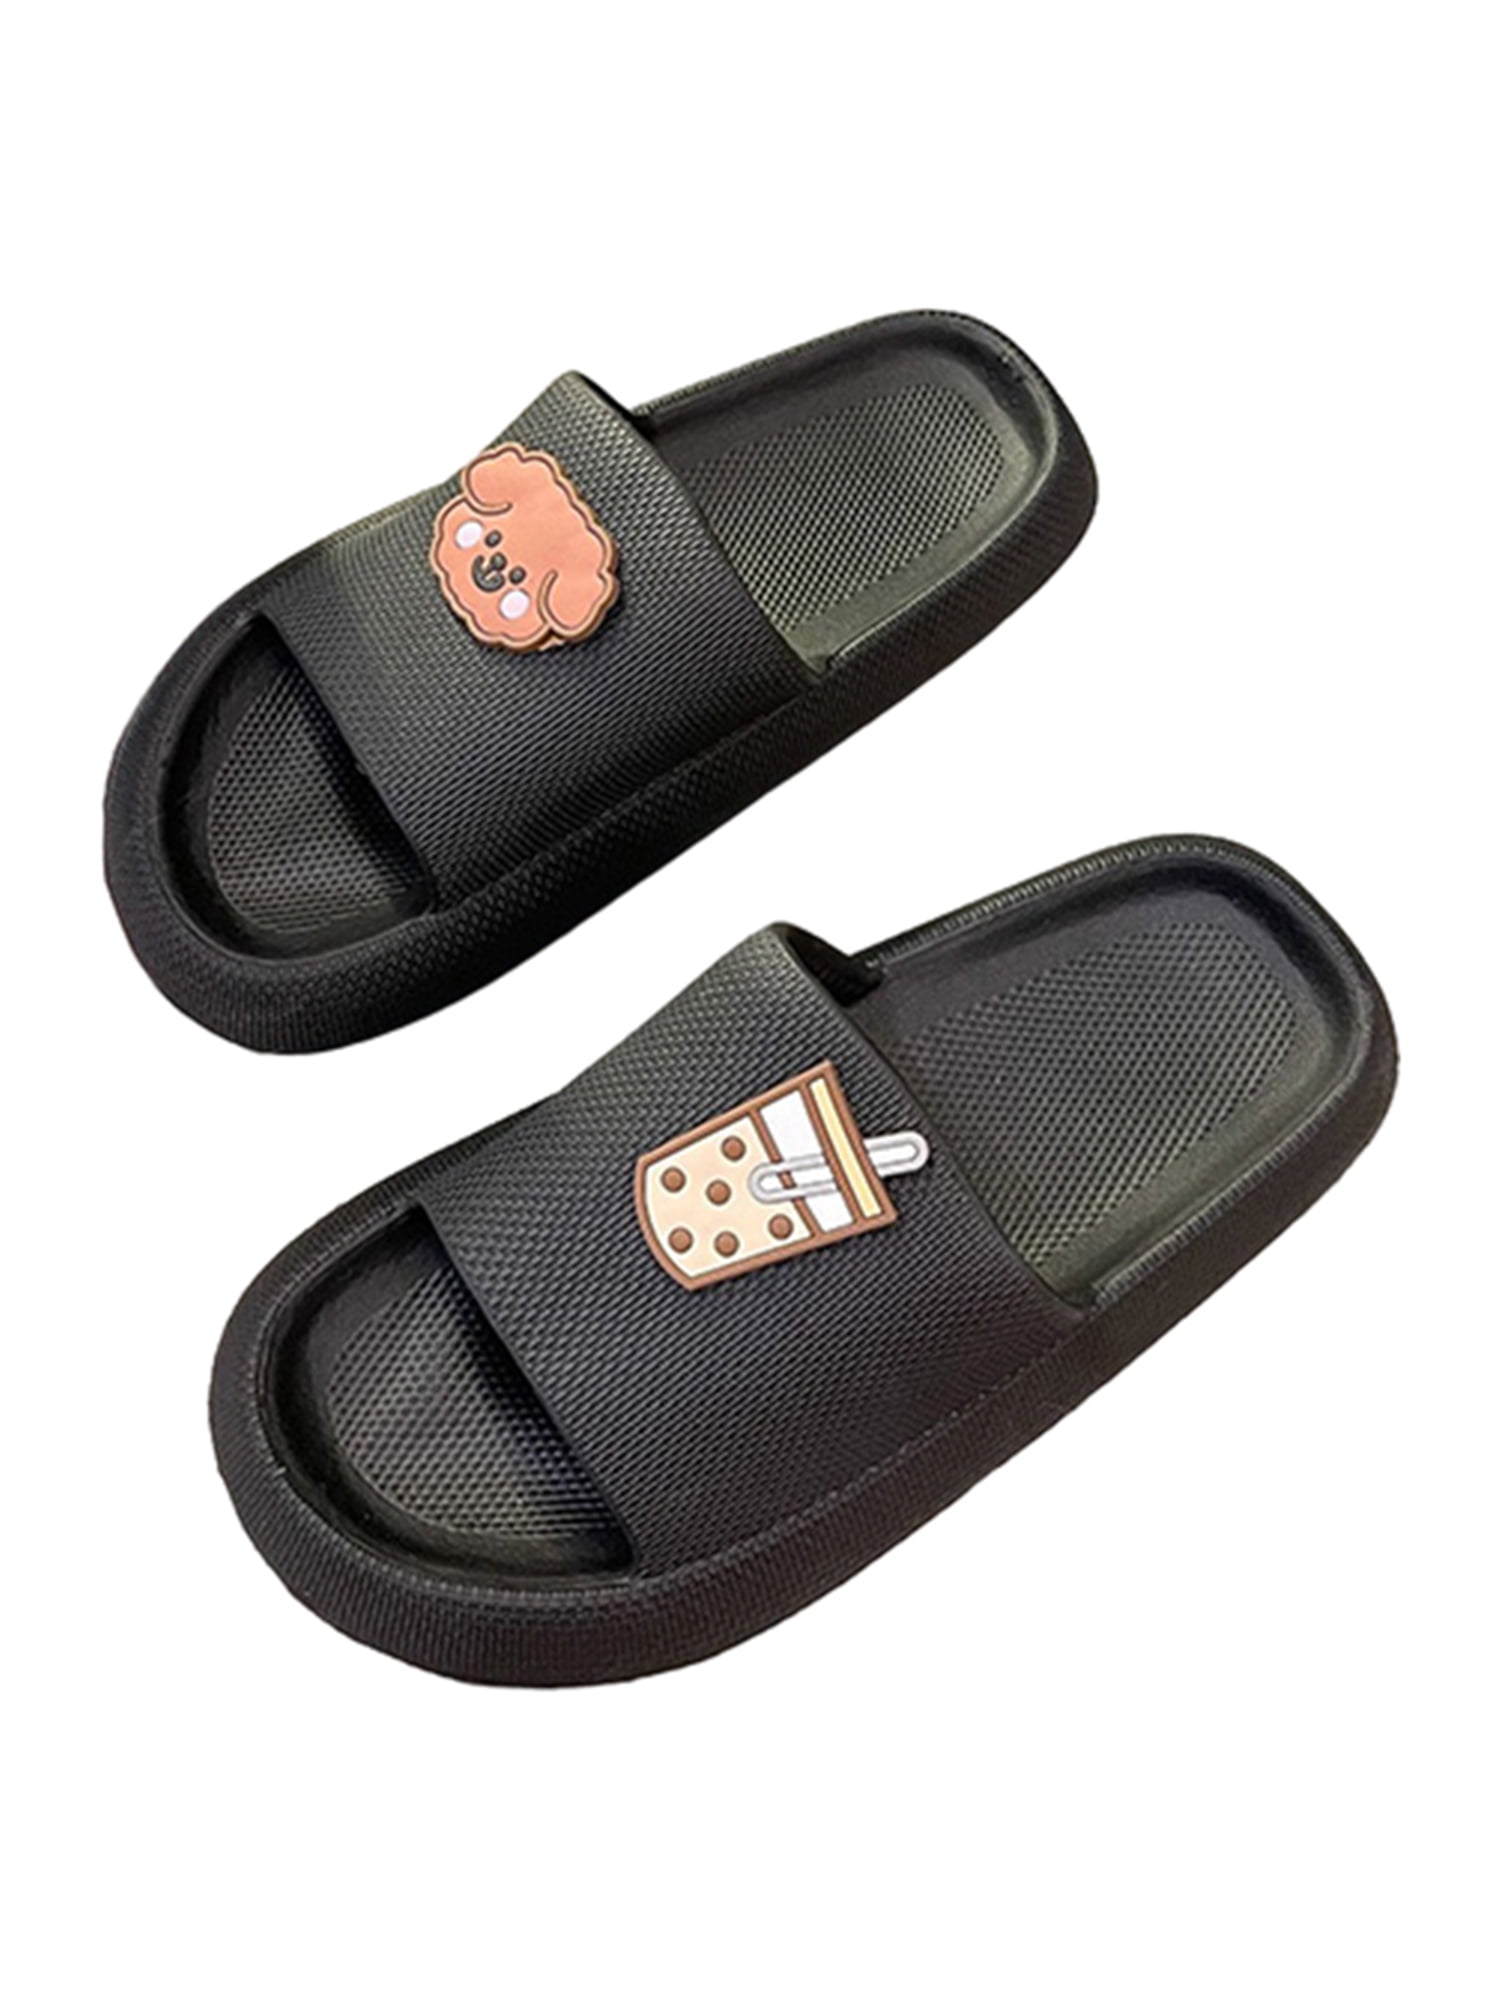 Pool Unisex Shower Shoes & Sandals Home Beach Non-Slip Quick Drying Shower Slides for Bathroom Women and Men Slippers Slides Soft & Lightweight Comfortable Indoor and Outdoor Slides 